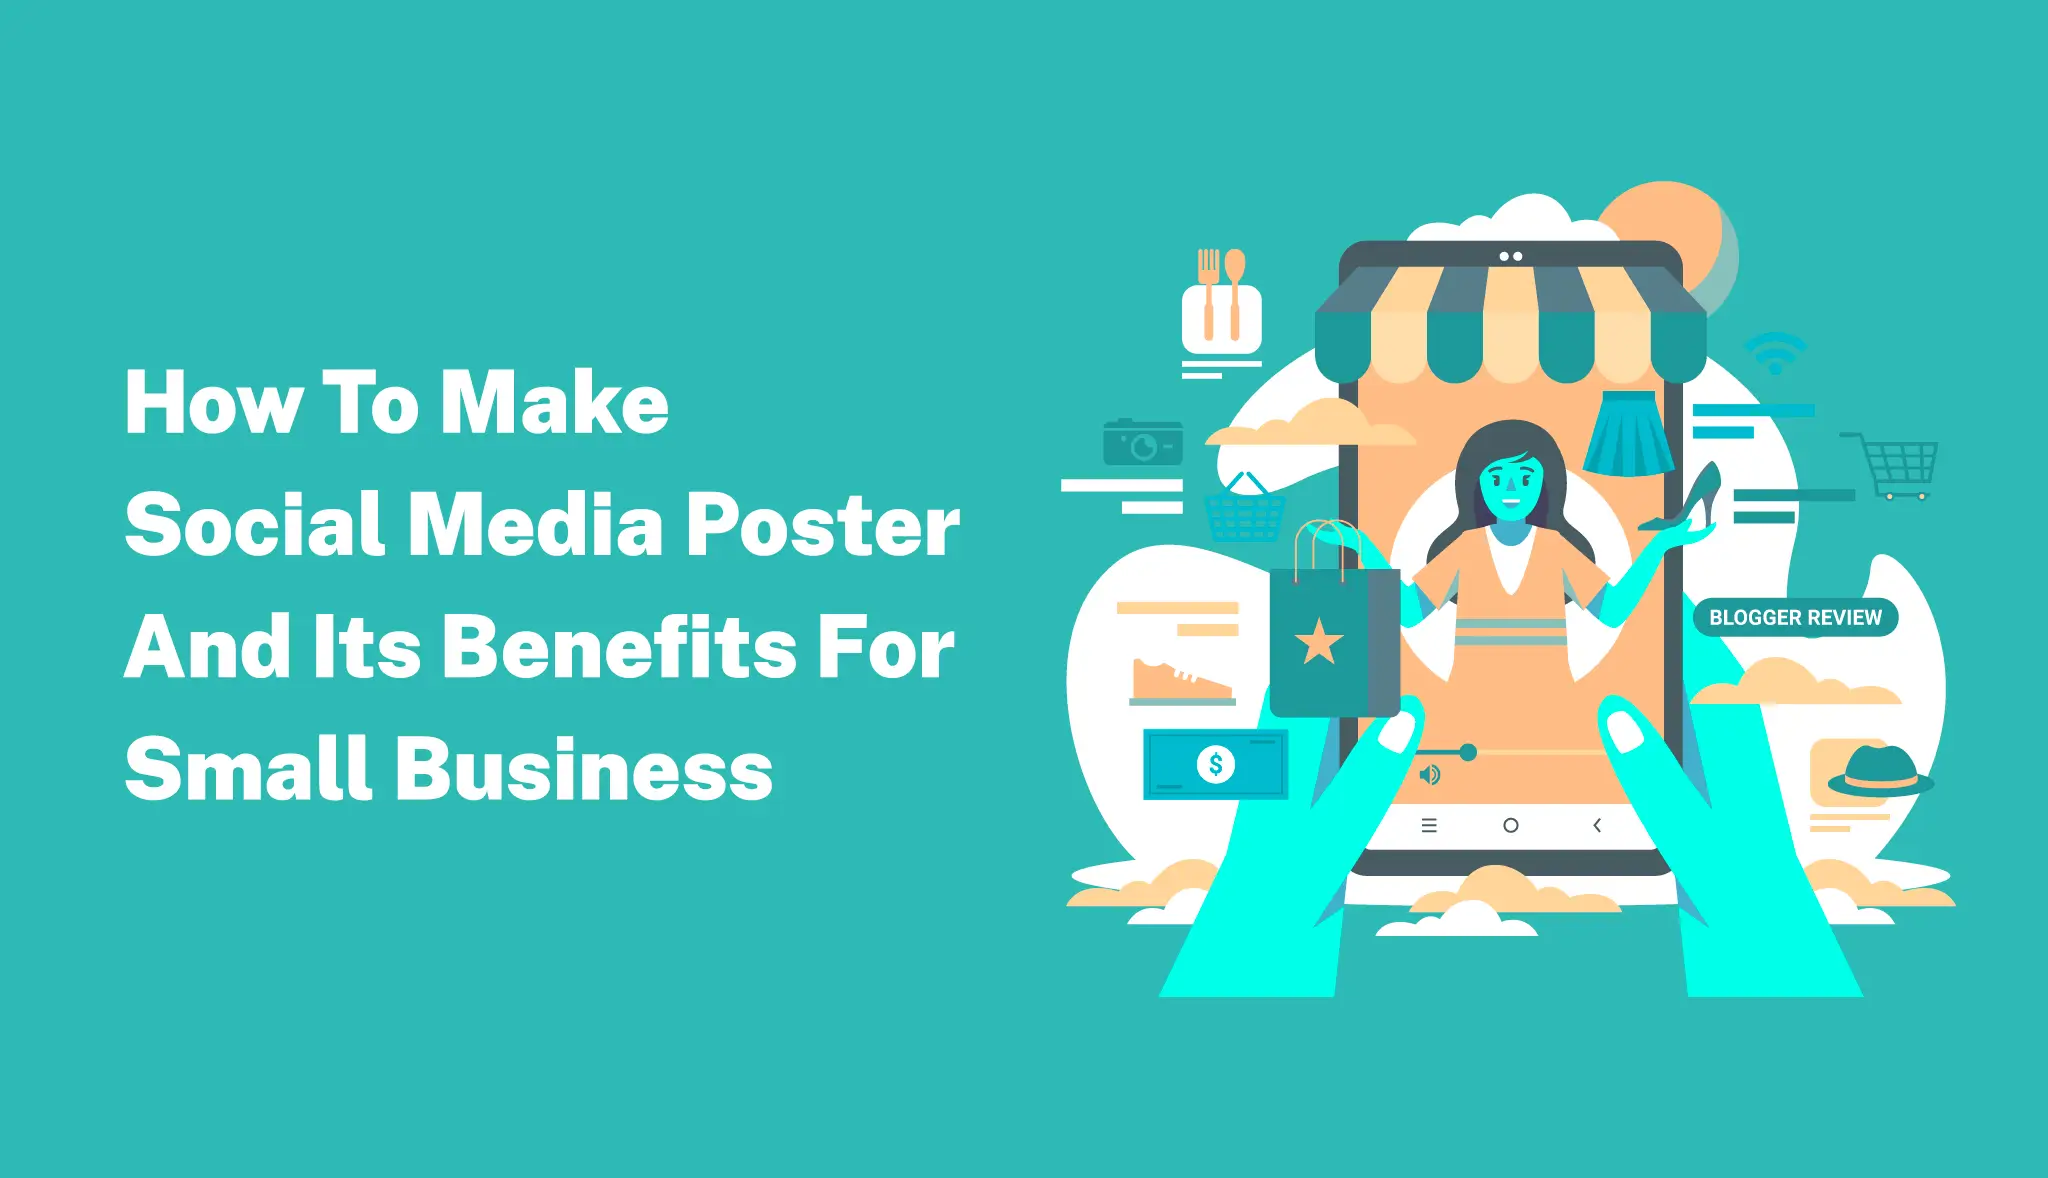 How To Make Social Media Poster And It's Benefits For Small Business | Postive - Festival Post Maker